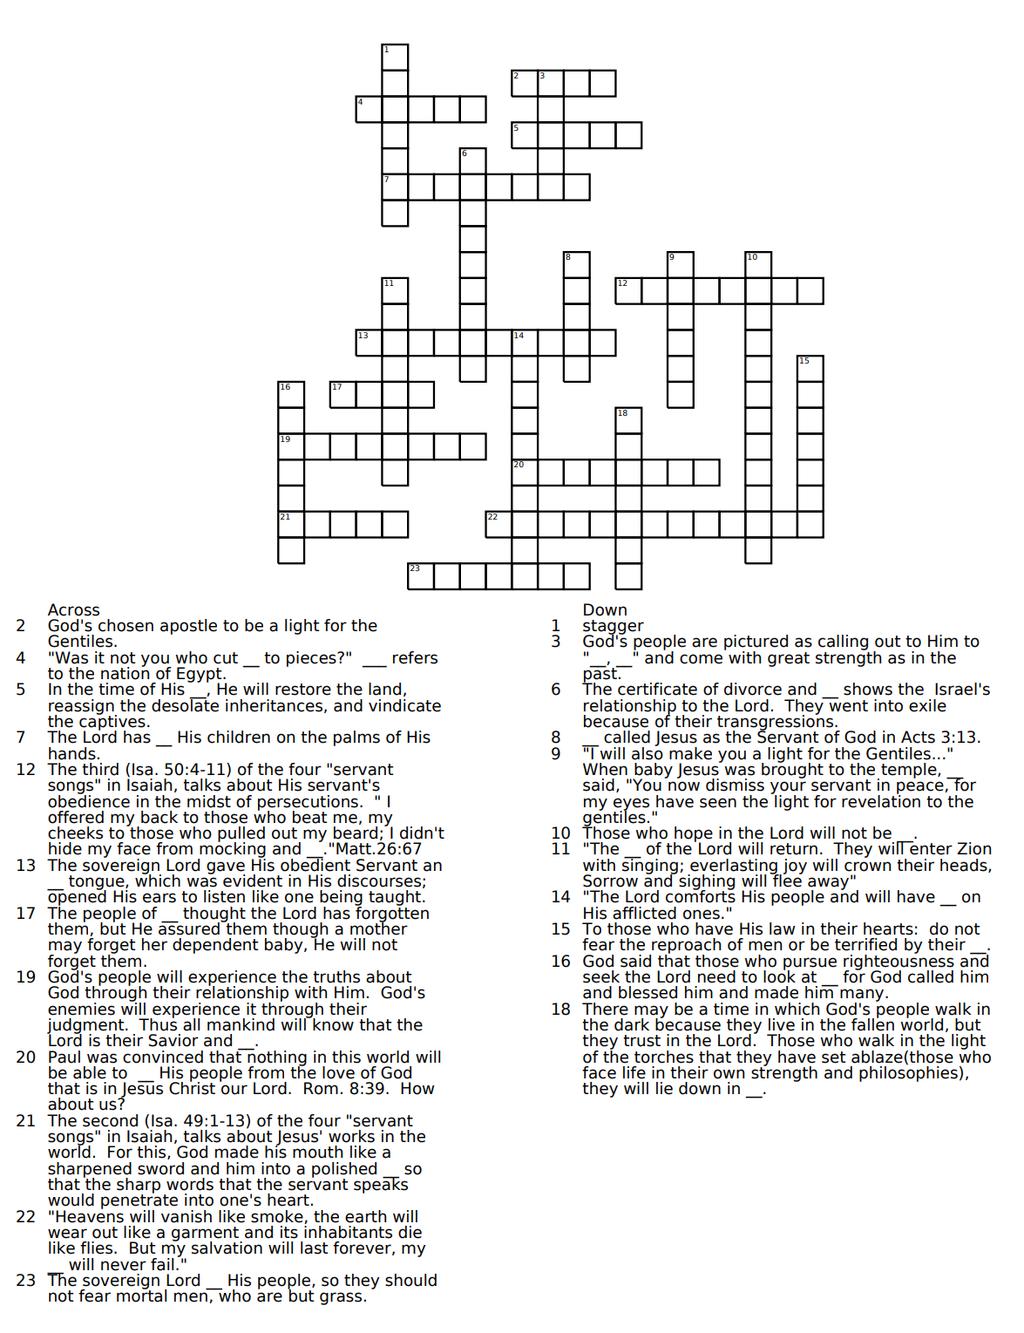 Page 7 CROSSWORD